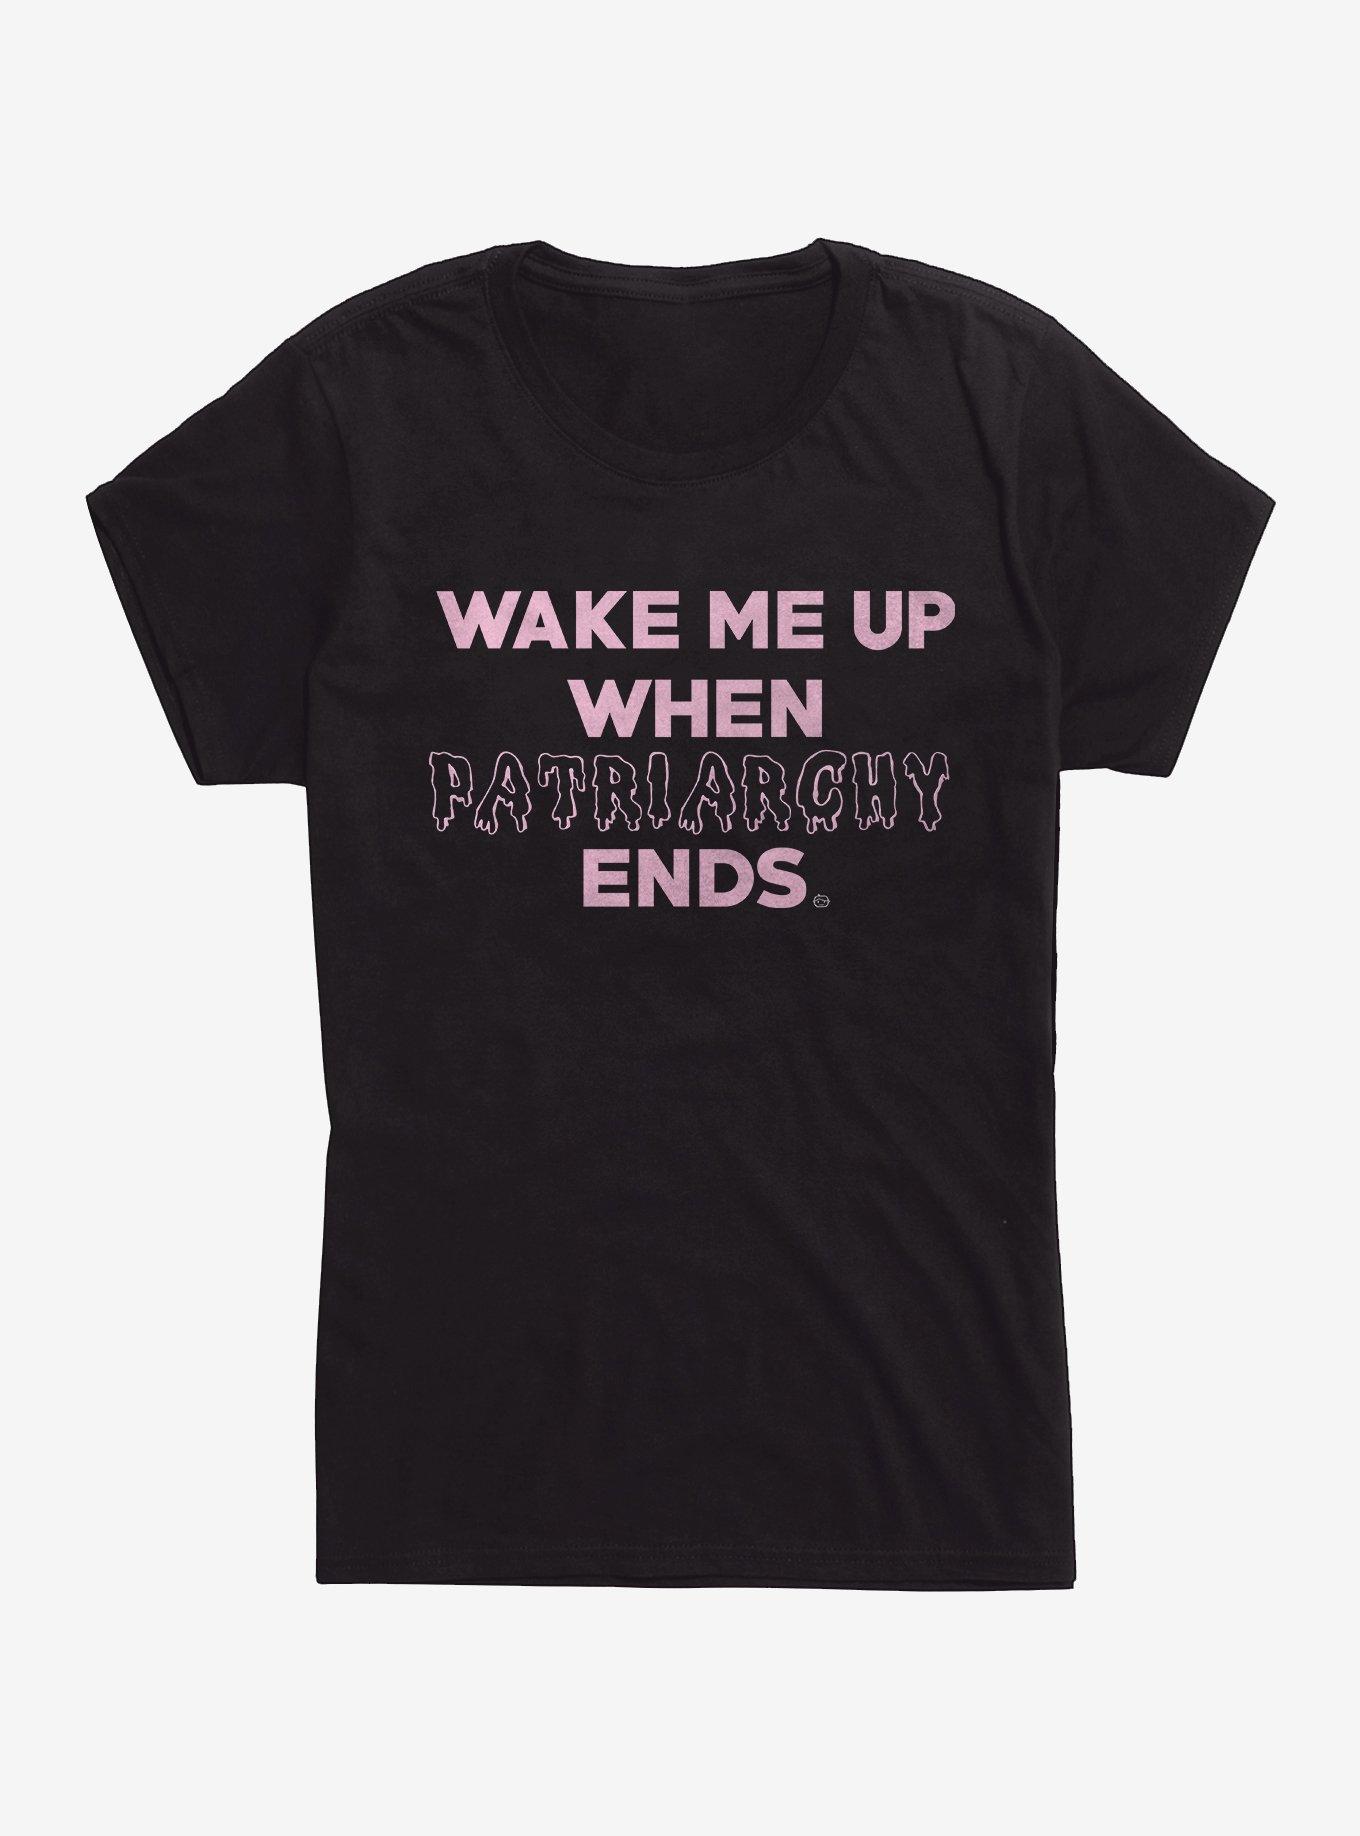 When Patriarchy Ends Womens T-Shirt, BLACK, hi-res